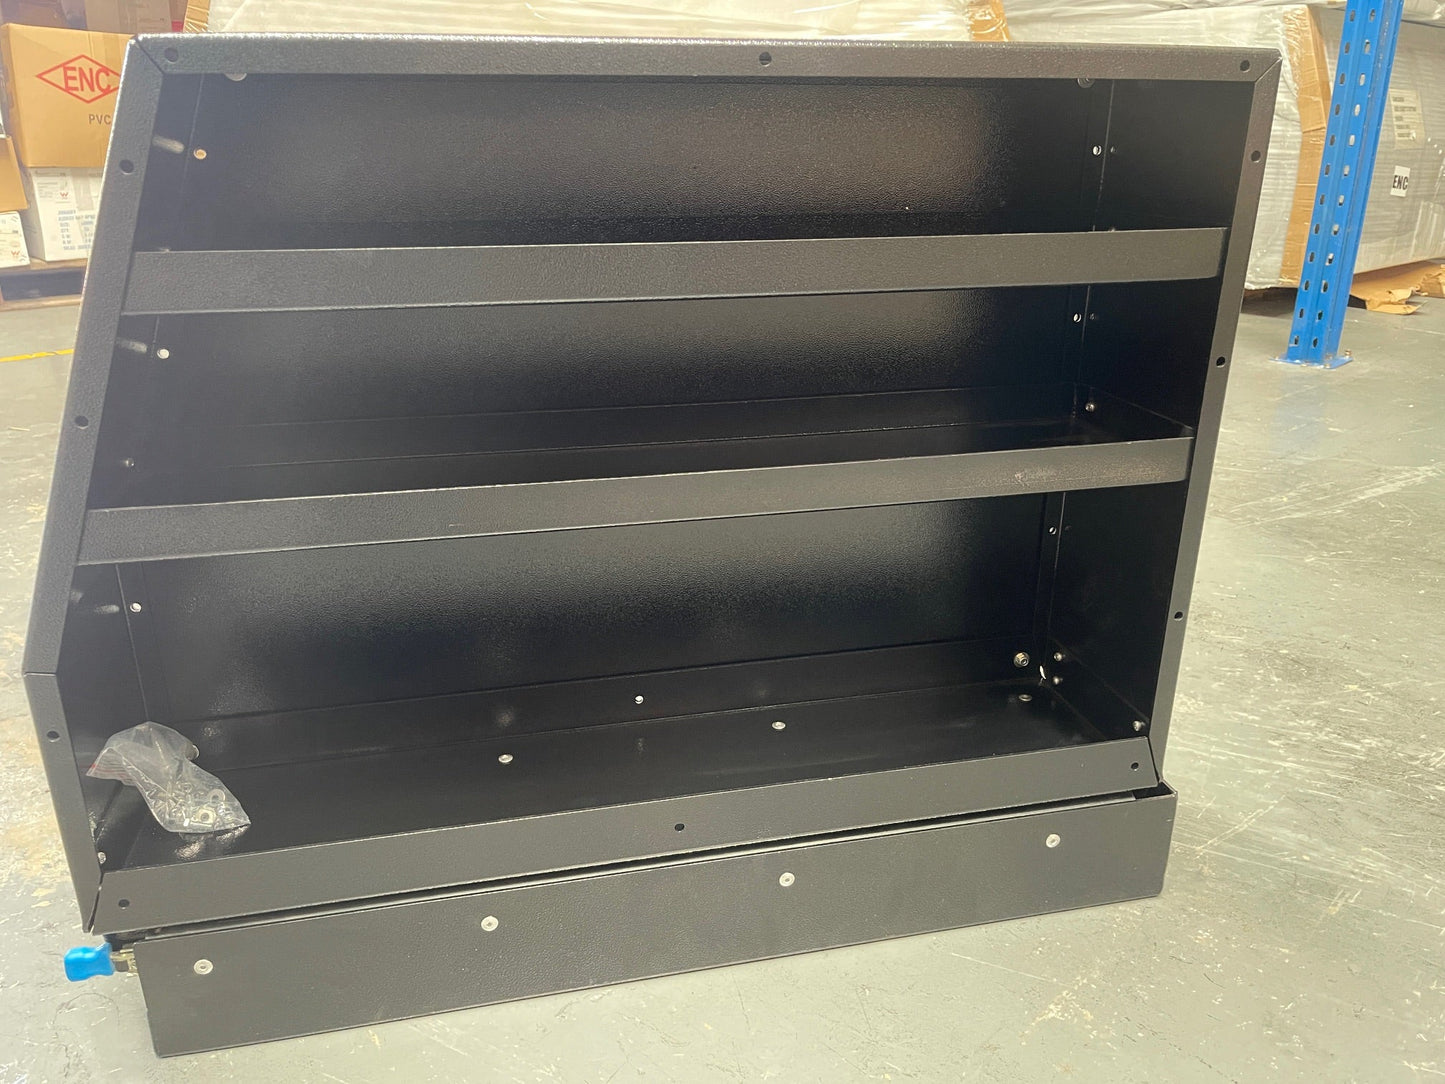 300mm Pantry - Canopy Pantry - Powder Coated in Black